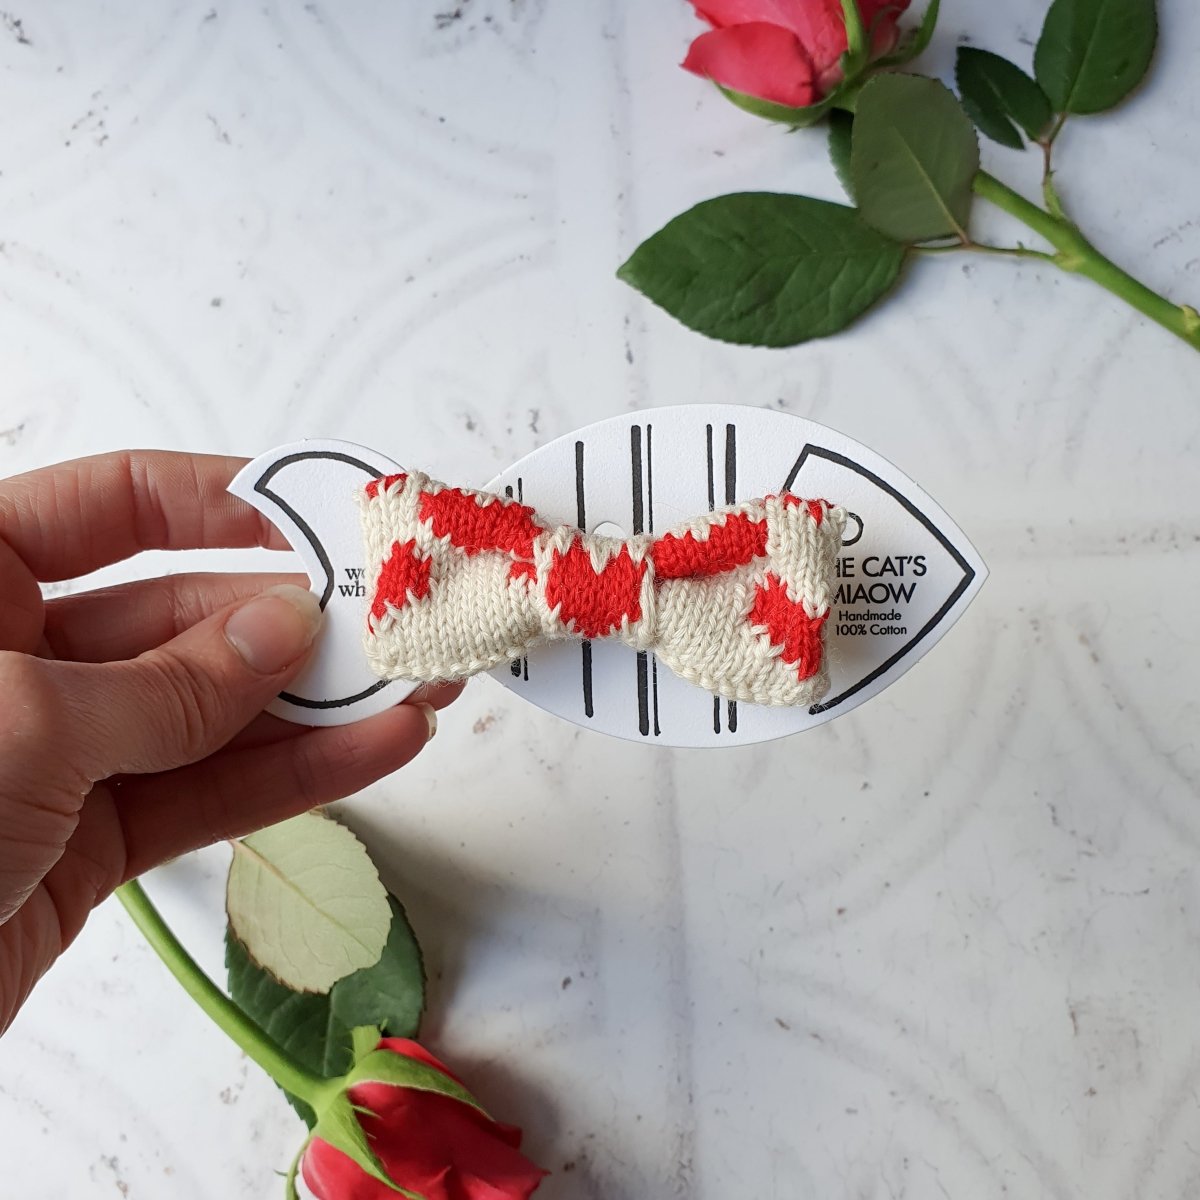 The Love Bow Tie (Cream + Red) : Cat/Tiny Dog - Wool & Water